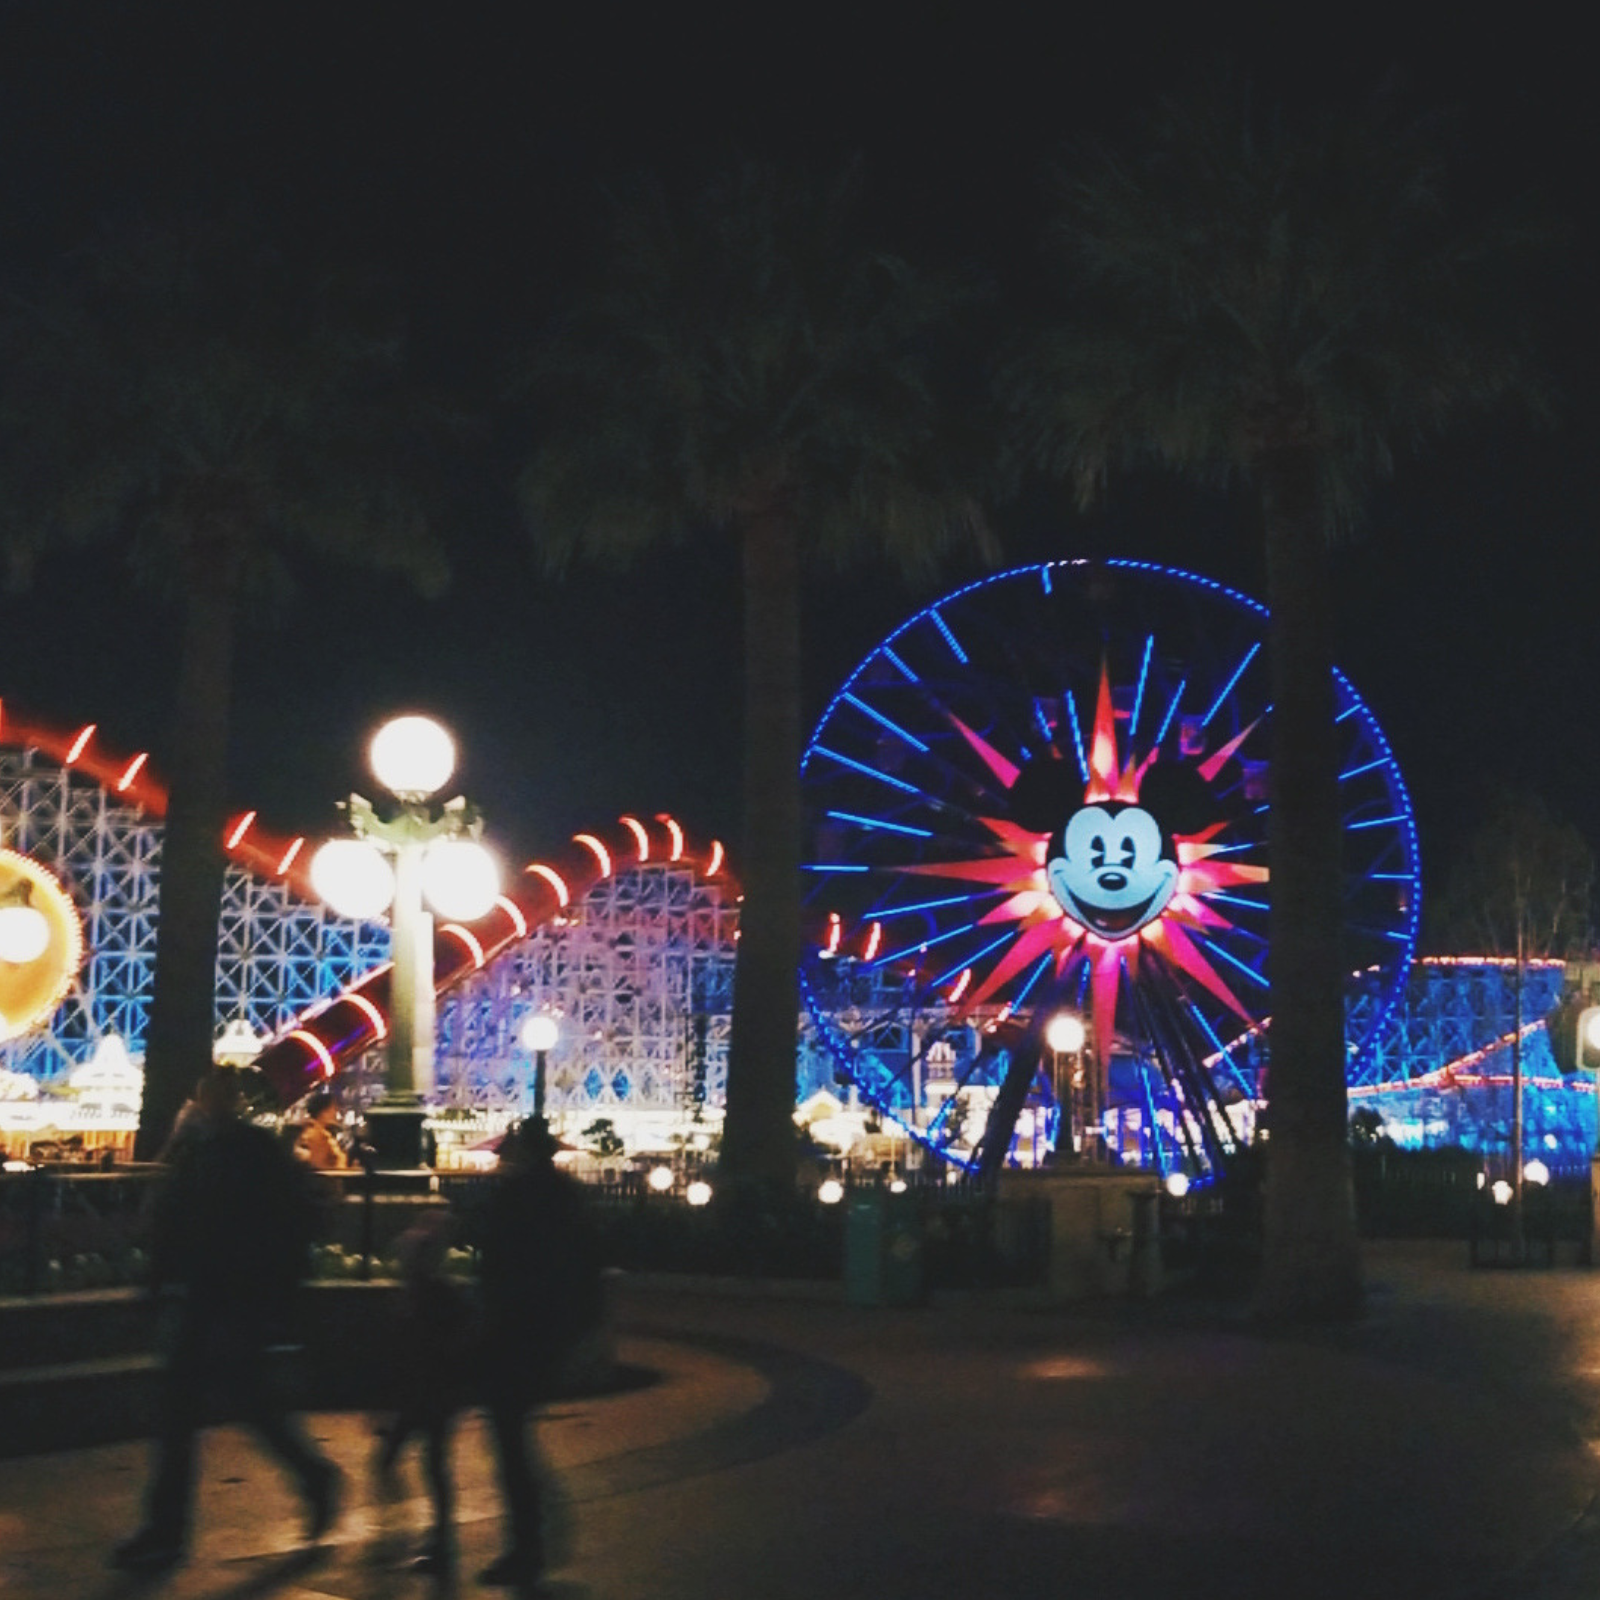 California Adventure at night with the ferris wheel with Mickey Mouse on it, lit up